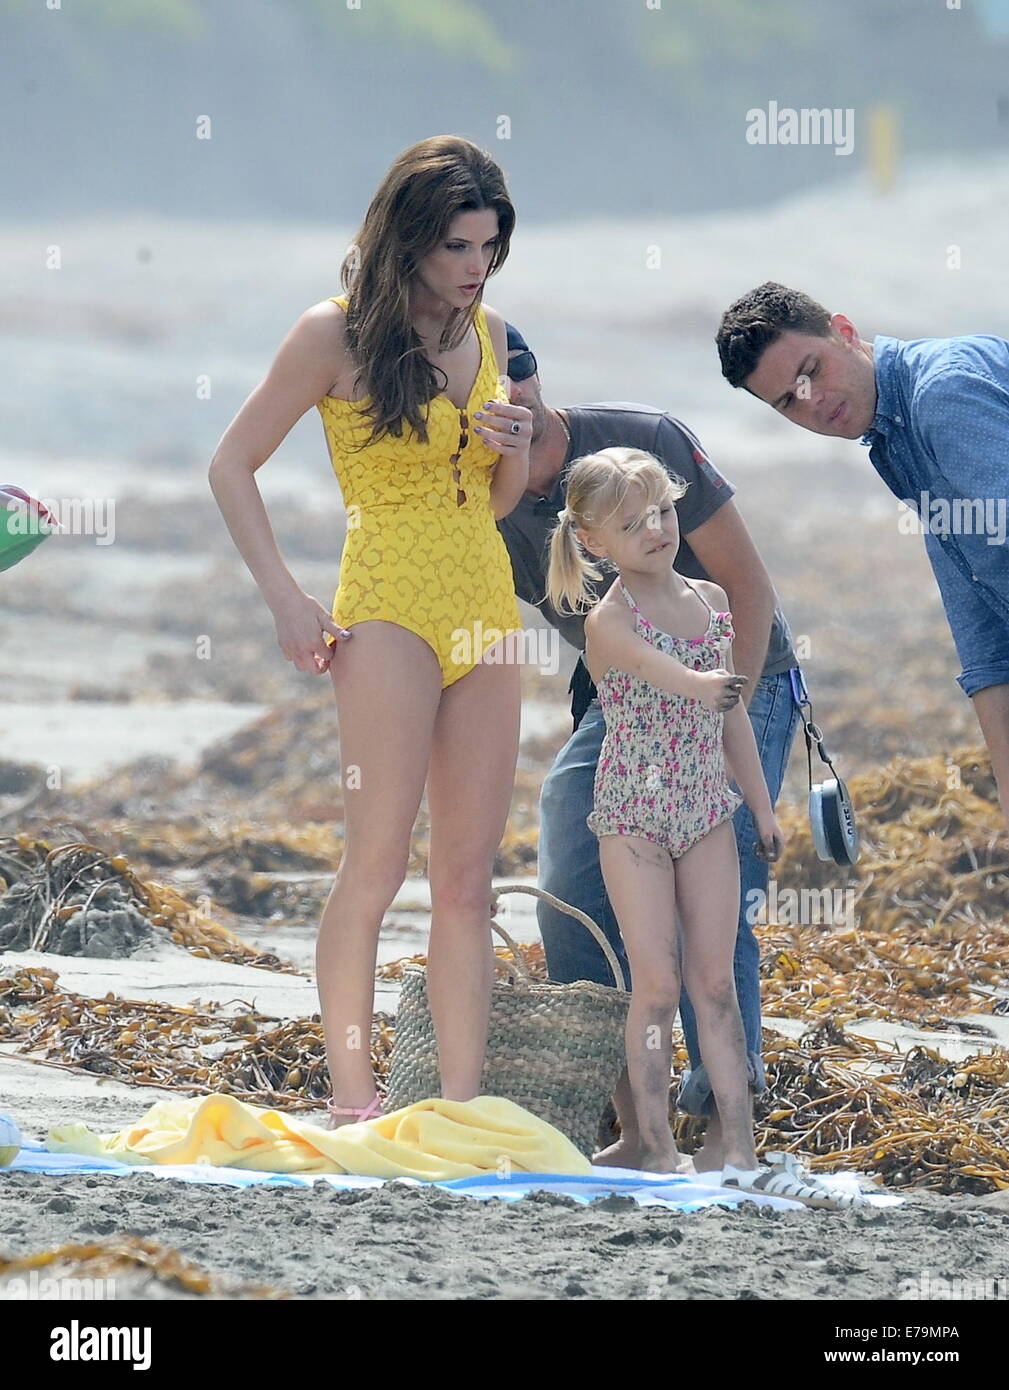 Ashley Greene shows off her beach body in a vintage-inspired bathing suit  on the set of 'The Shangri-La Suite' shooting on location in Redondo Beach.  The actress, who is depicting Priscilla Presley